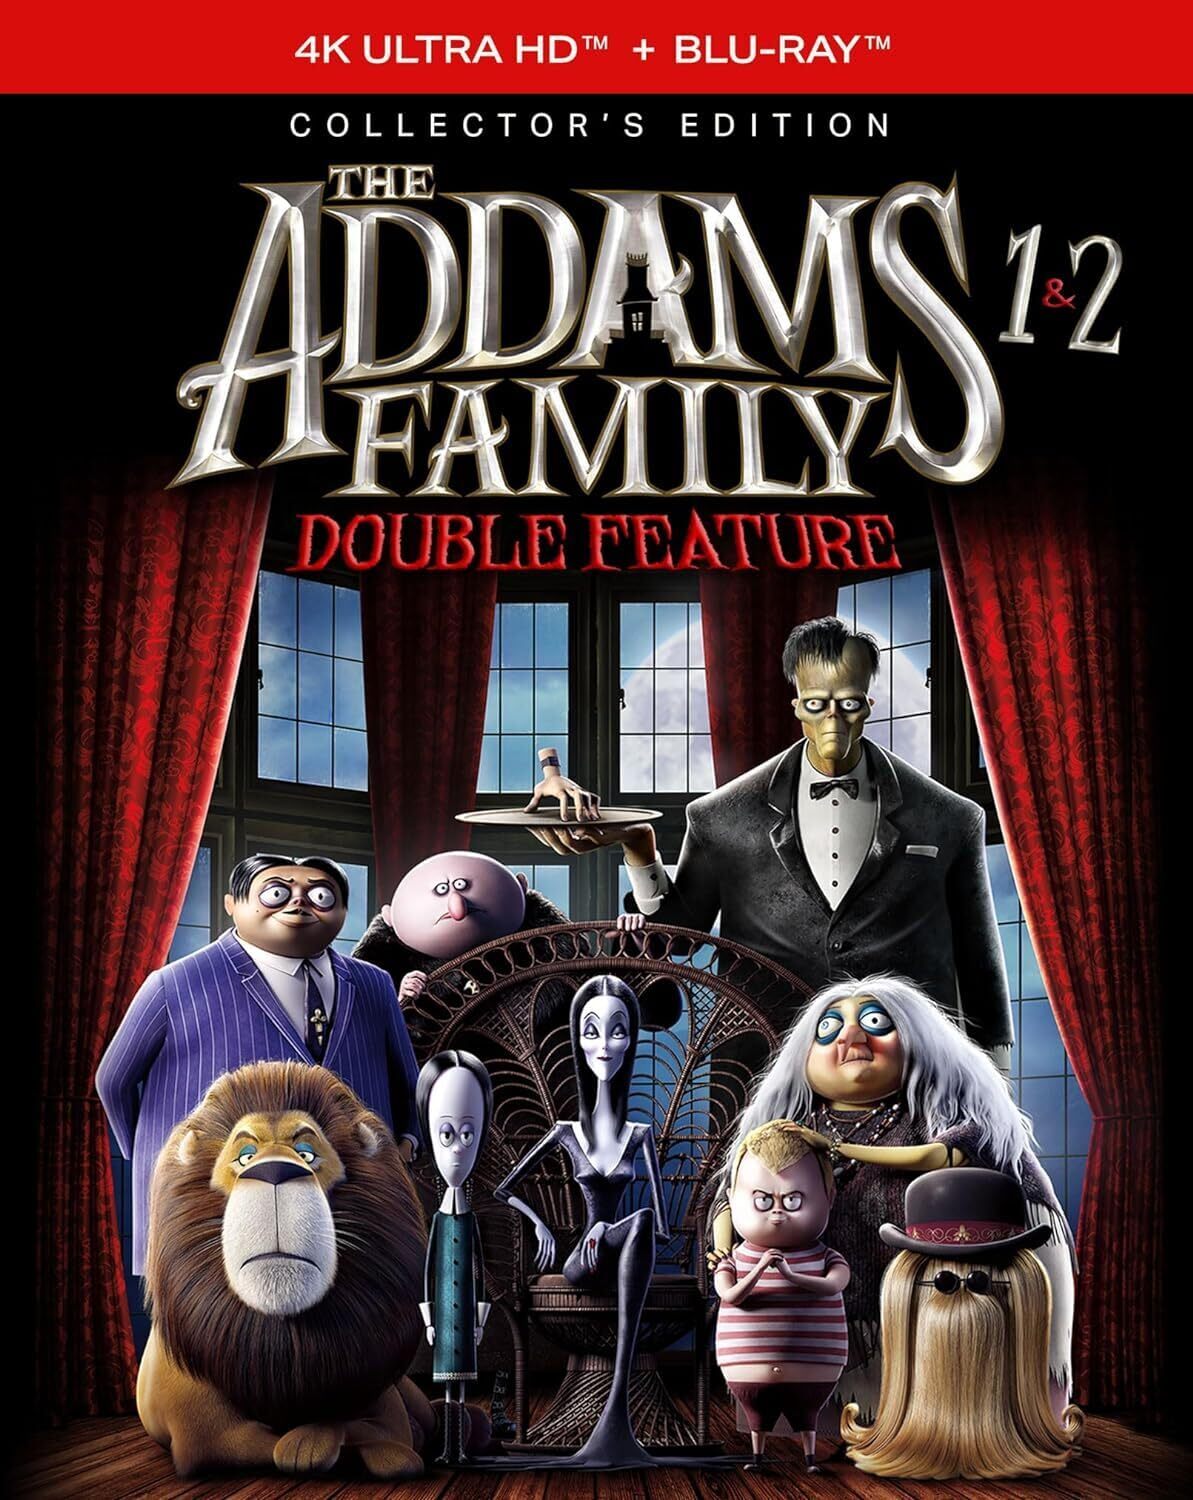 THE ADDAMS FAMILY 1&2 DOUBLE FEATURE 4K UHD/BLU-RAY [PRE-ORDER]